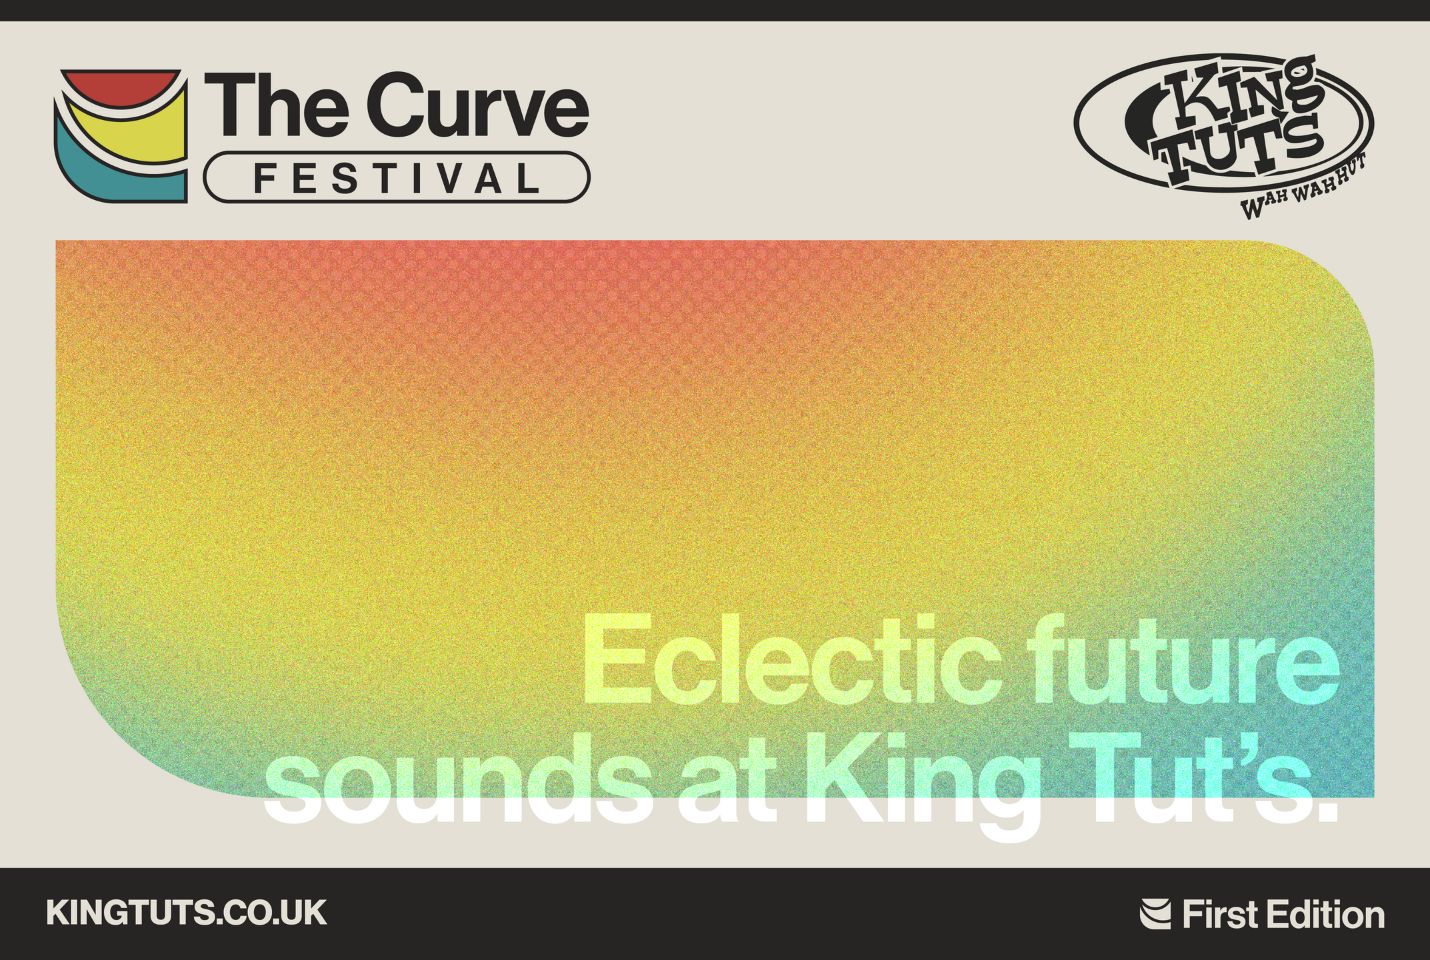 The Curve Festival